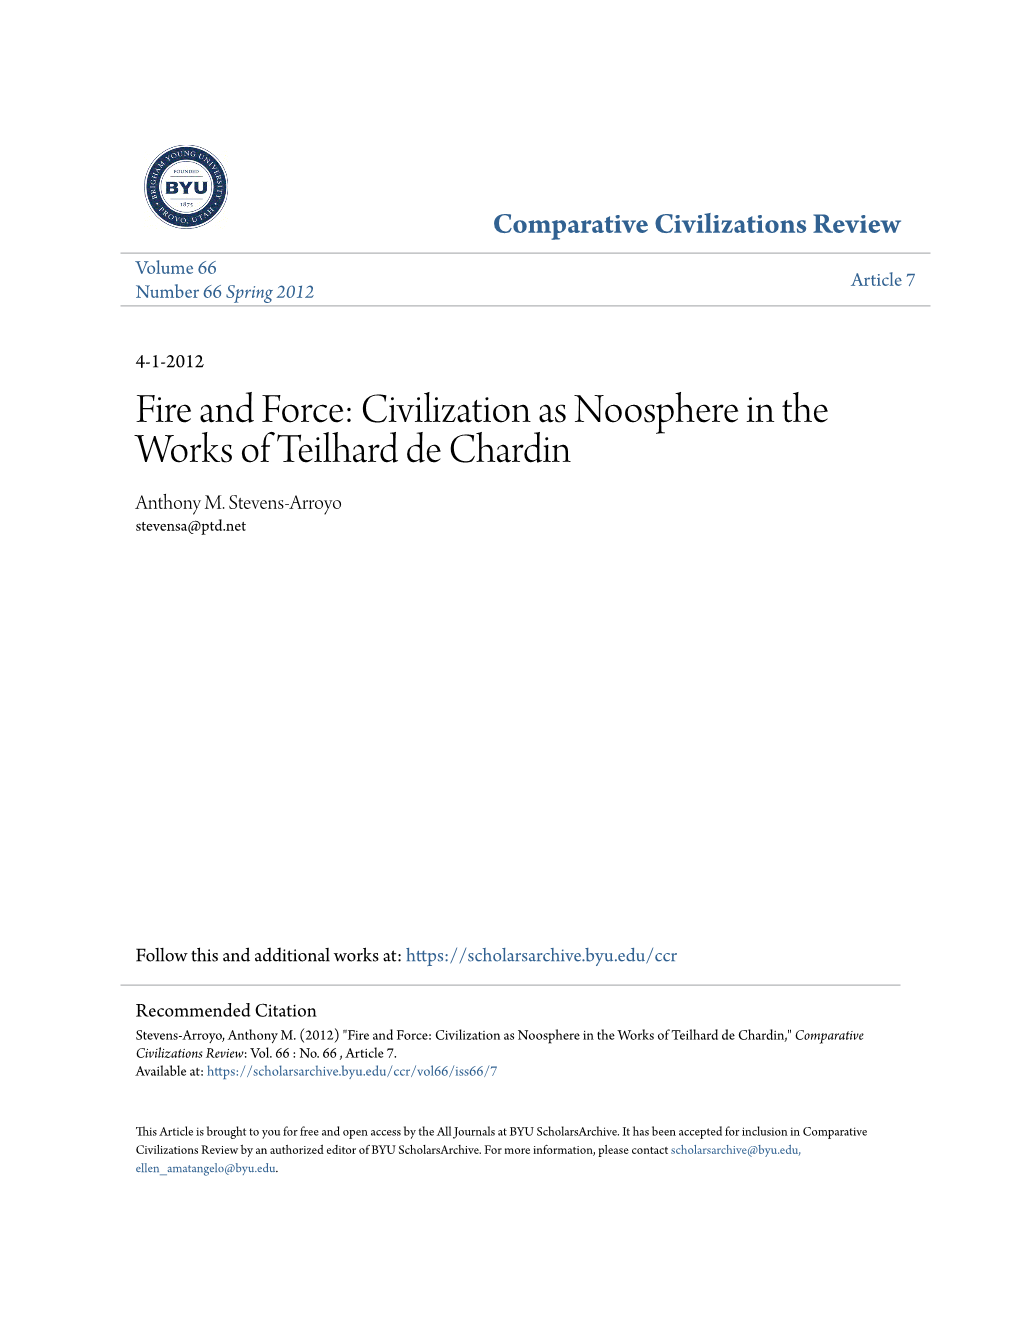 Civilization As Noosphere in the Works of Teilhard De Chardin Anthony M